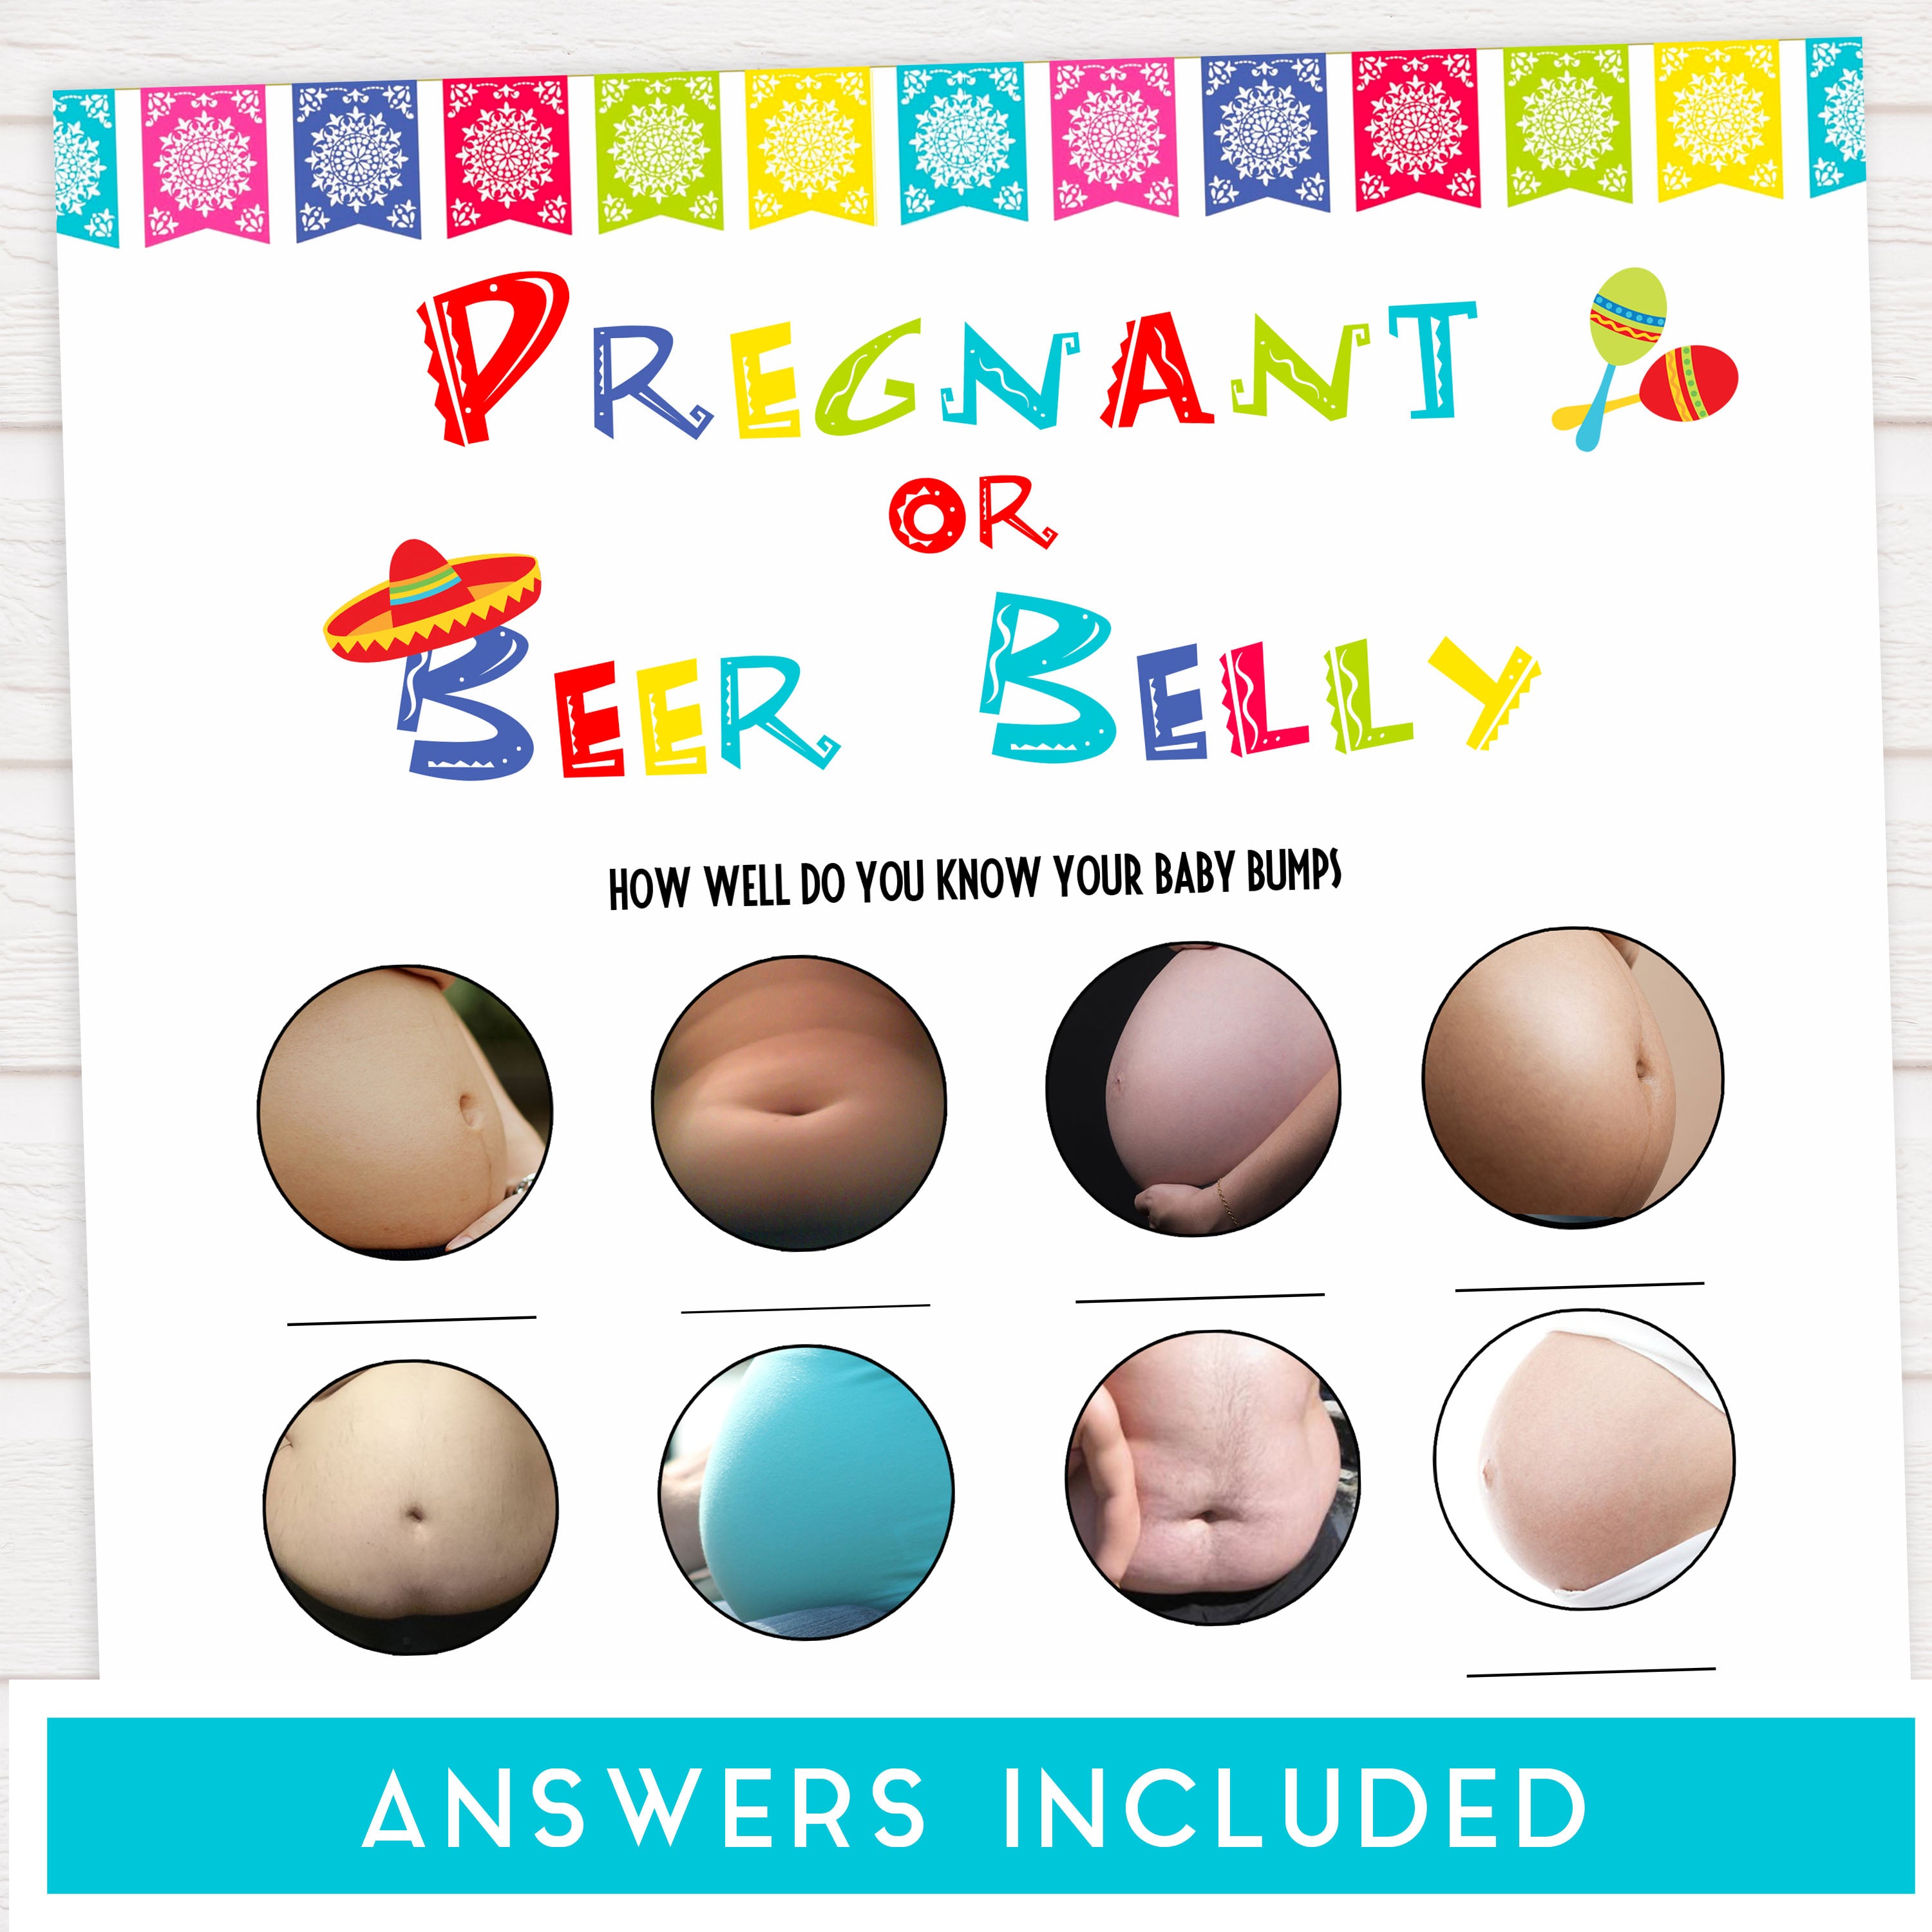 pregnancy or beer belly game, baby bump game, Printable baby shower games, Mexican fiesta fun baby games, baby shower games, fun baby shower ideas, top baby shower ideas, fiesta shower baby shower, fiesta baby shower ideas